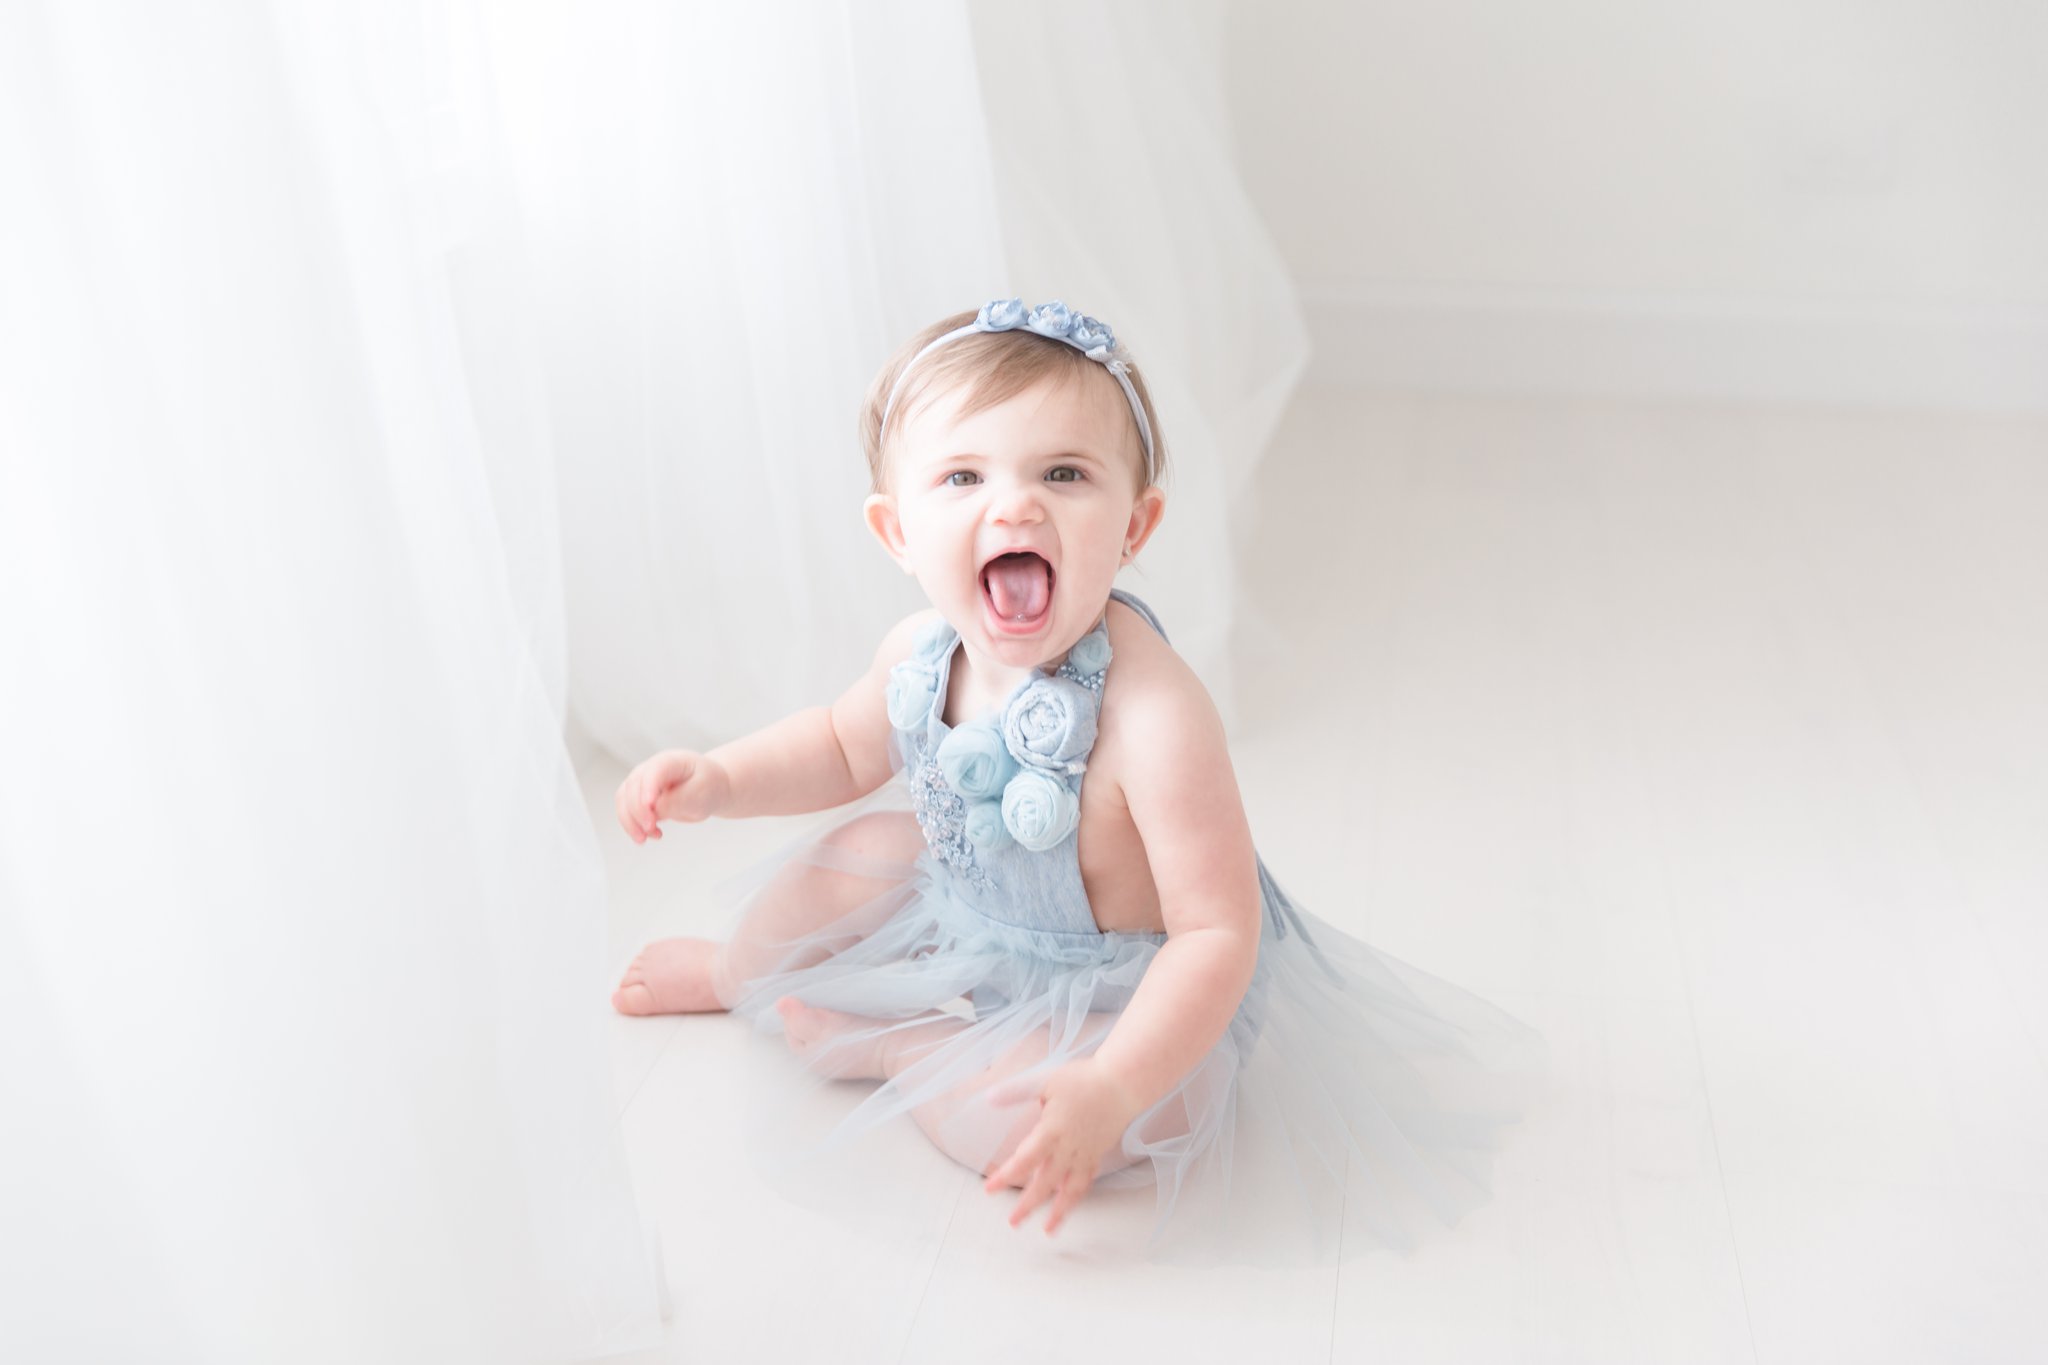 One year old baby having a portraits taken in handmade blue dress.